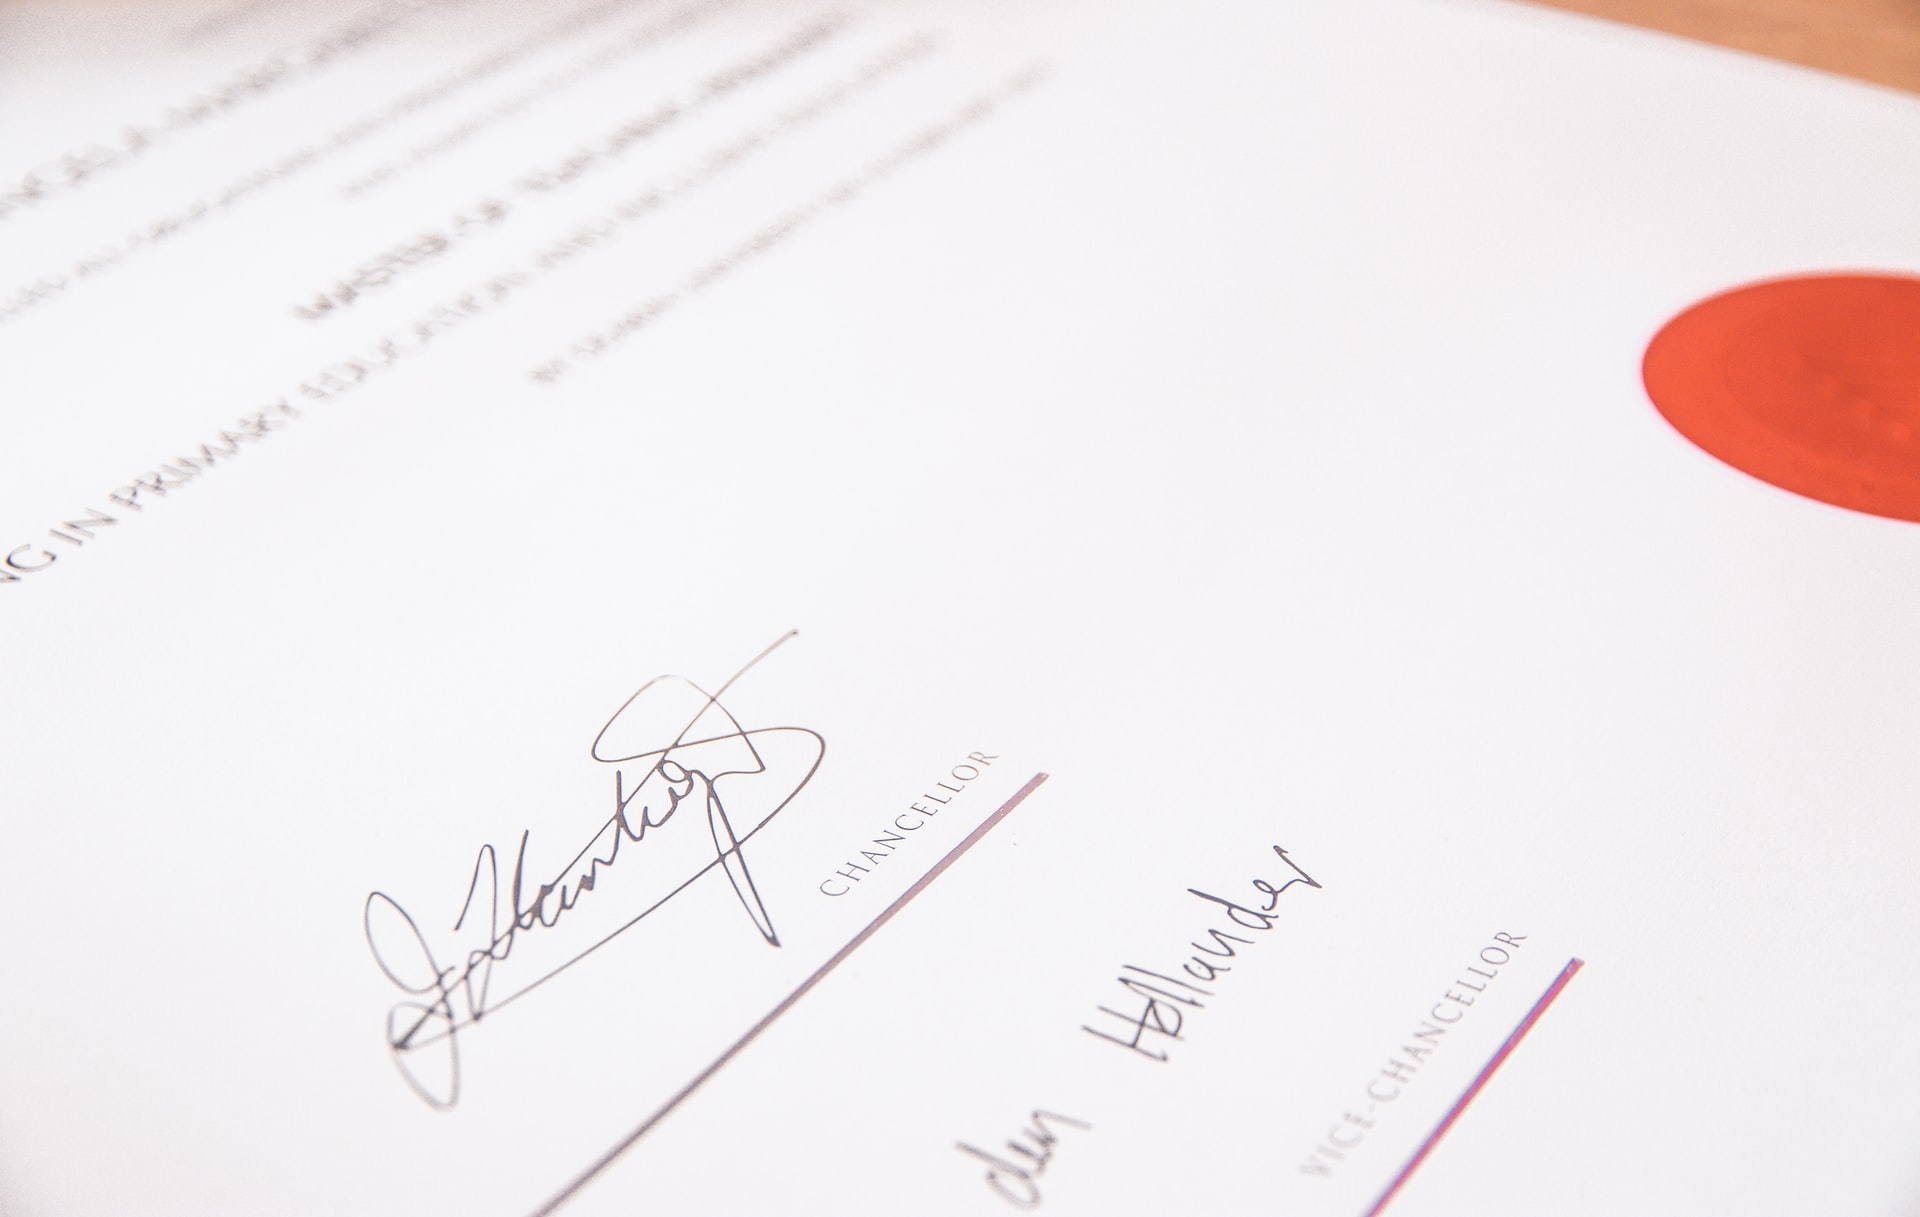 signatures on a business document